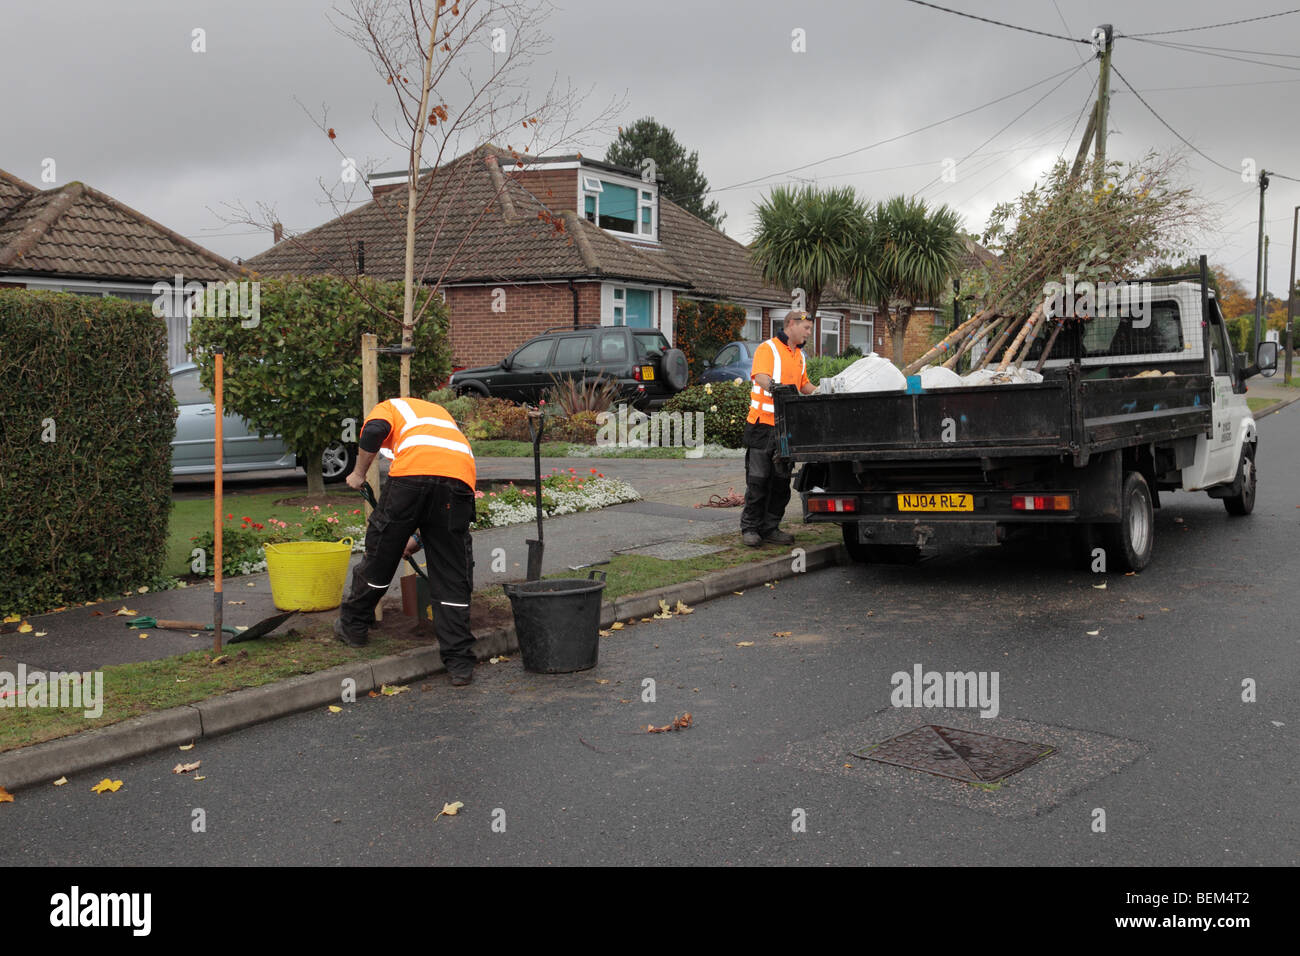 Men planting a tree in a street. Bromley, London, Kent, England, UK. Stock Photo